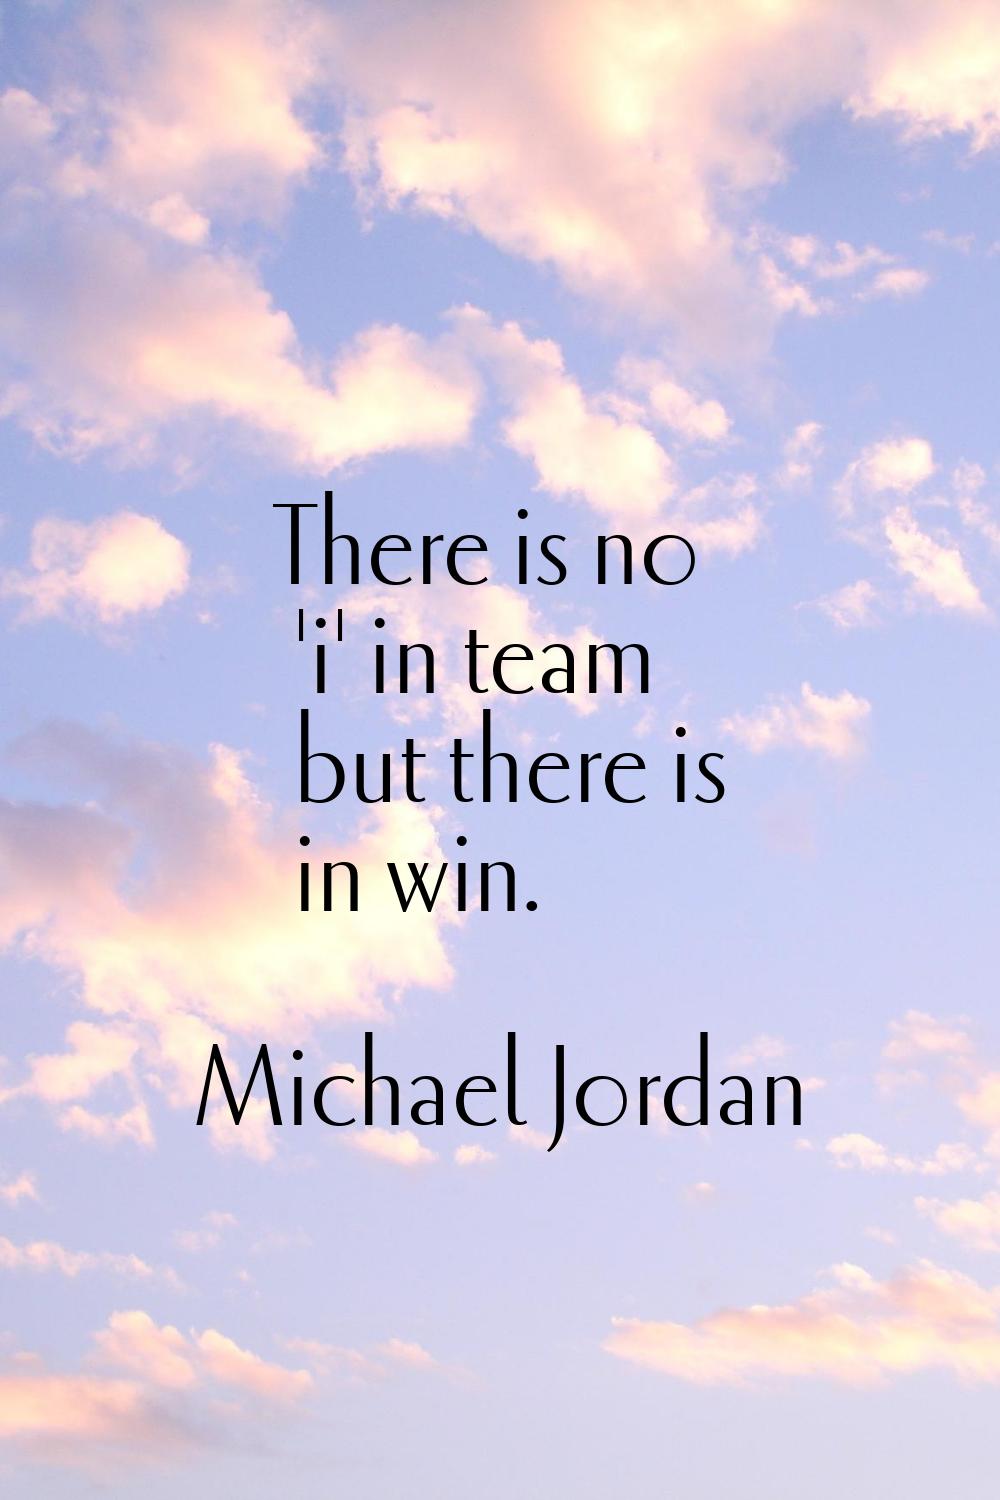 There is no 'i' in team but there is in win.